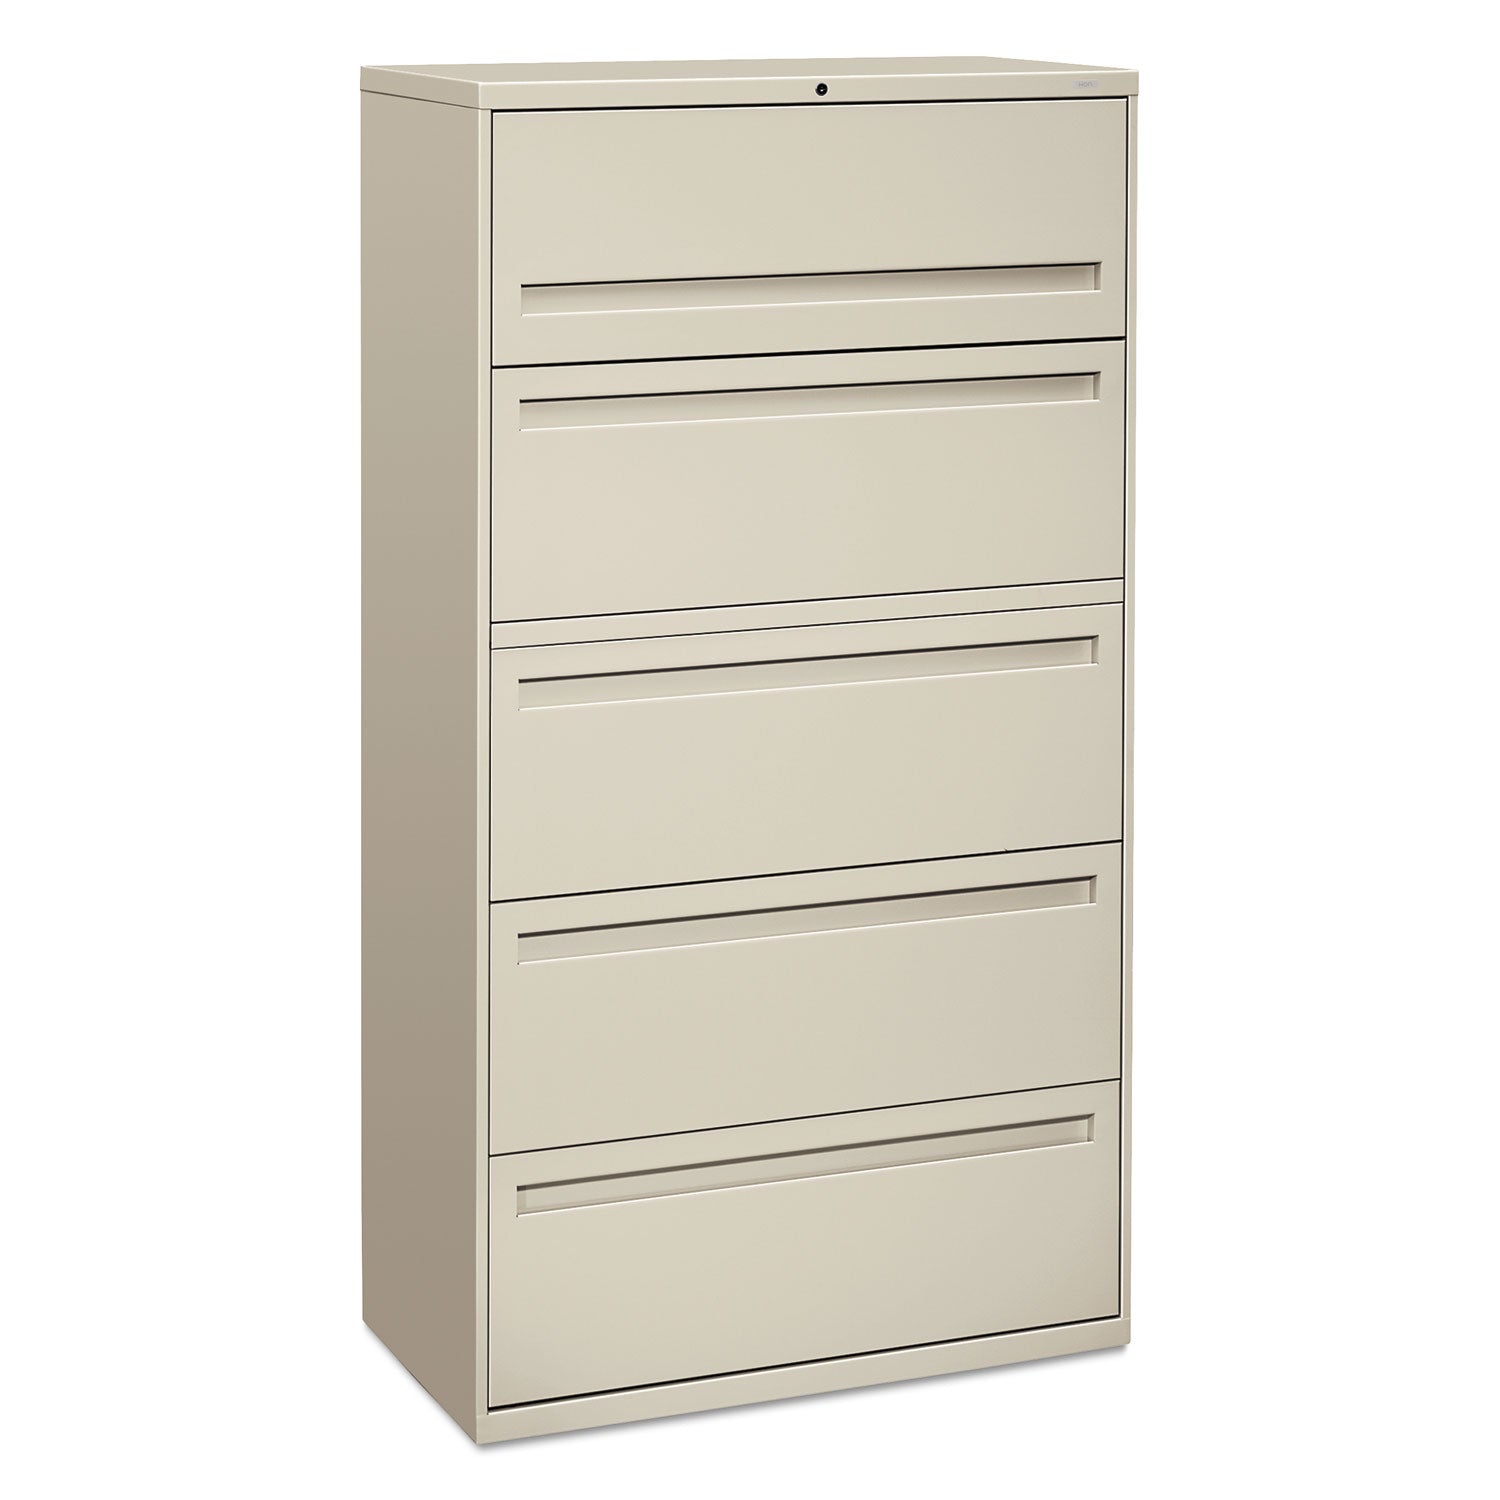 Brigade 700 Series Lateral File, 4 Legal/Letter-Size File Drawers, 1 File Shelf, 1 Post Shelf, Light Gray, 36" x 18" x 64.25 - 